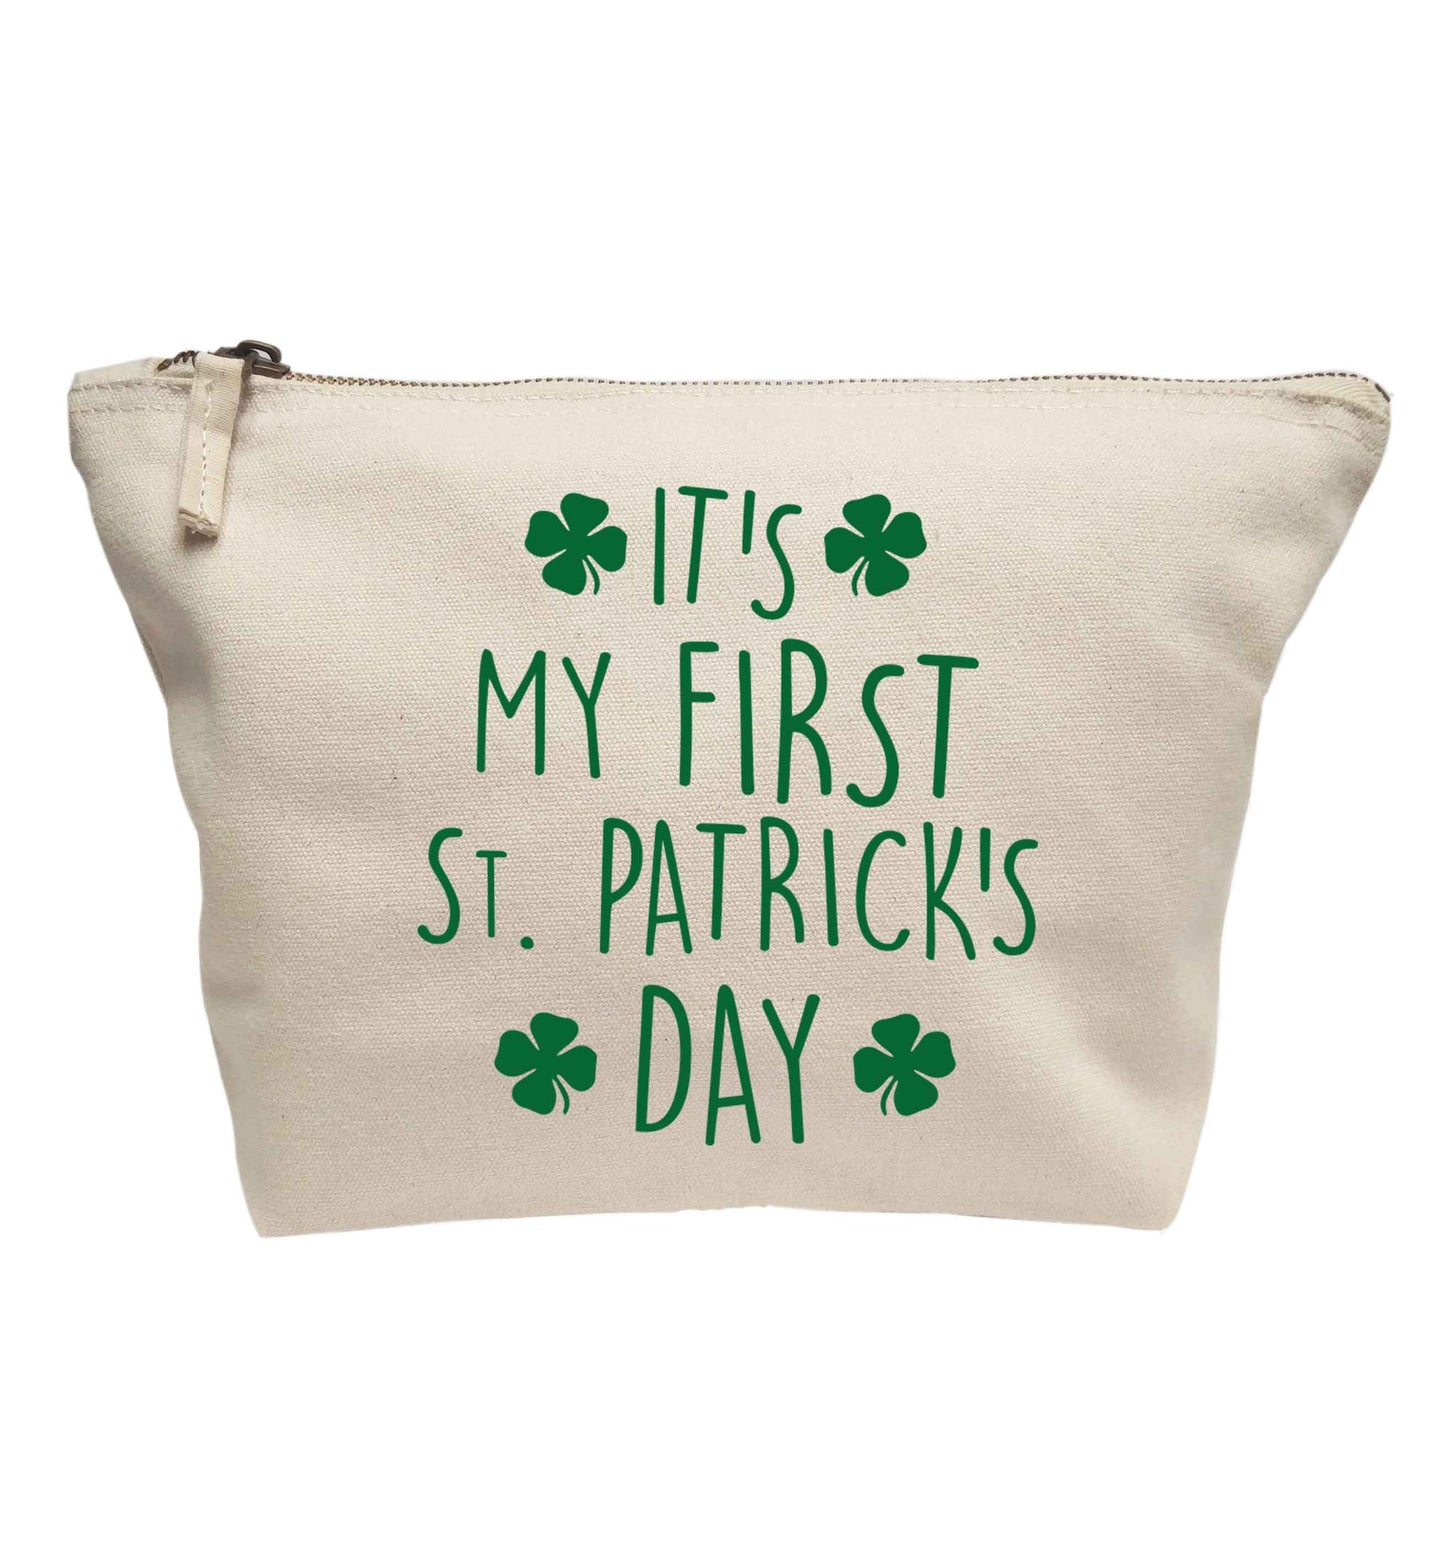 It's my first St.Patrick's day | Makeup / wash bag